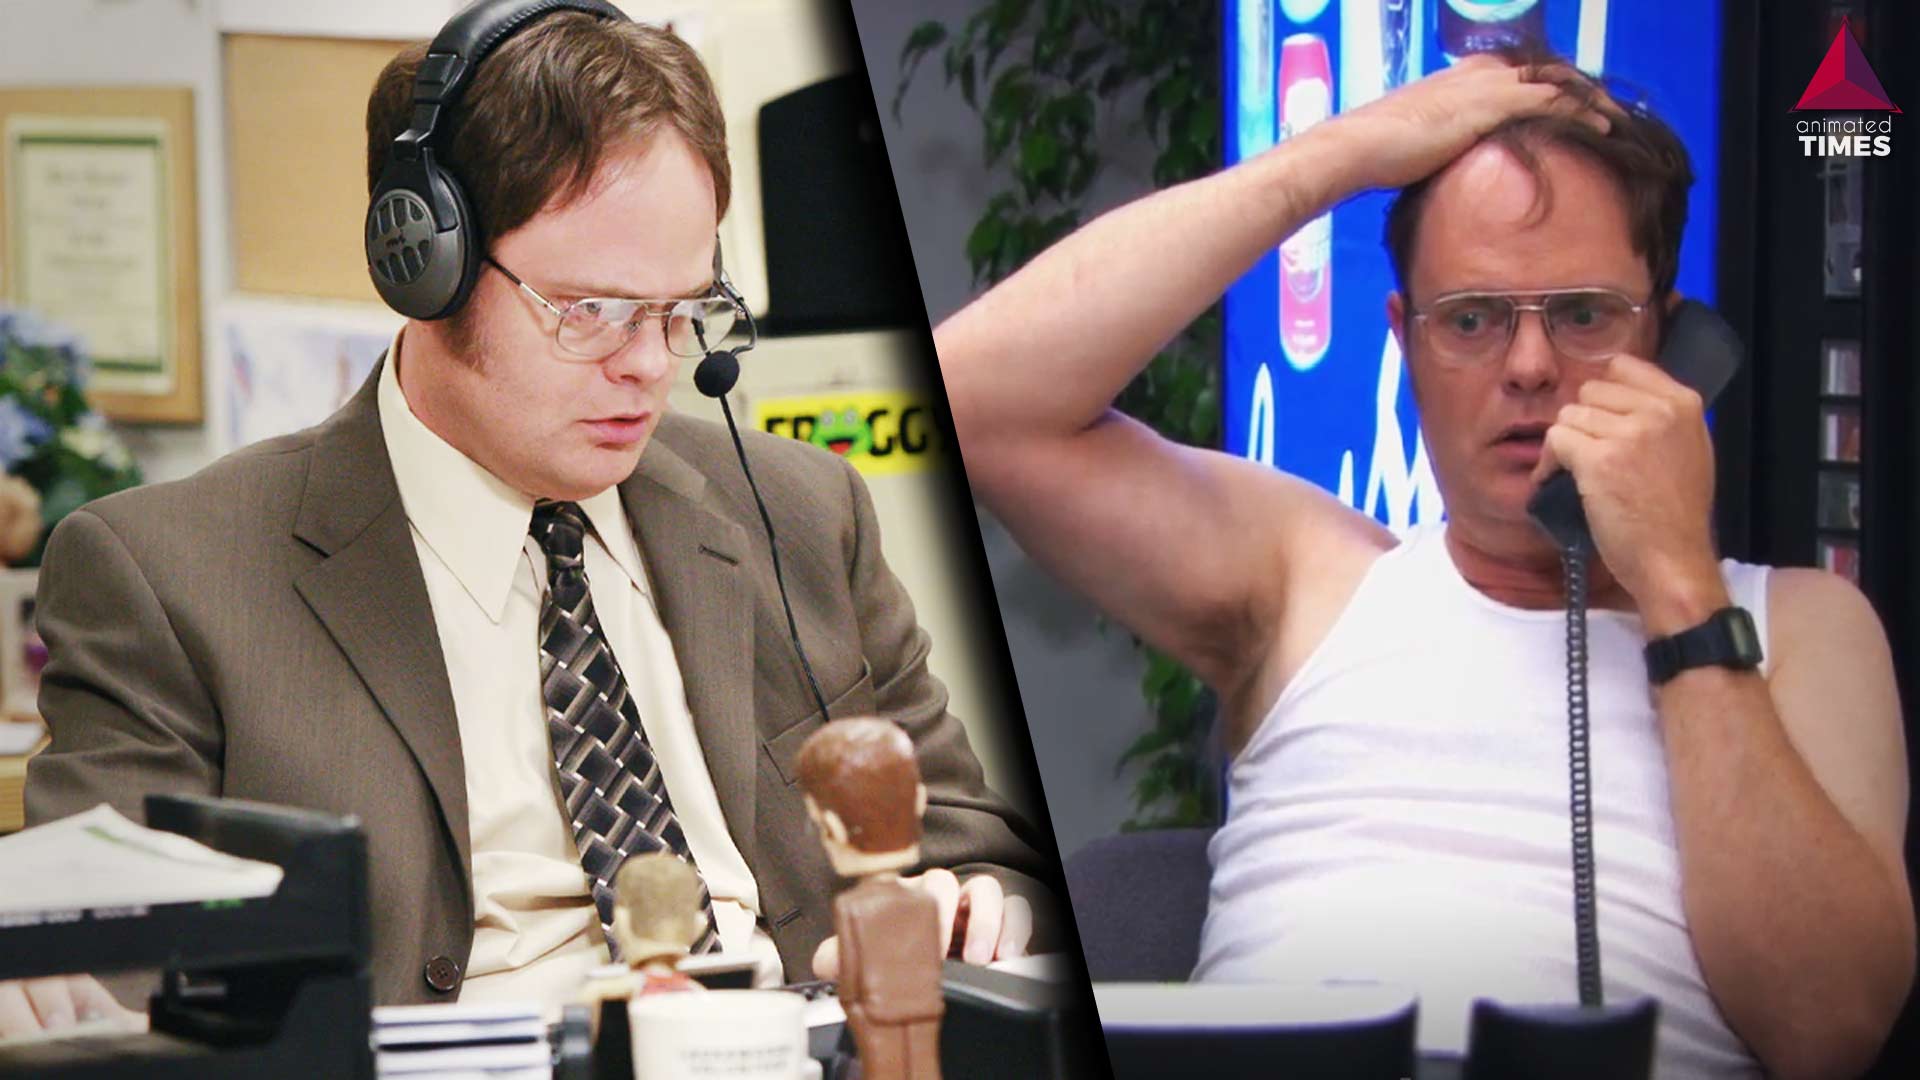 The Office: 10 Funniest Phone Calls by Dwight Schrute - Animated Times